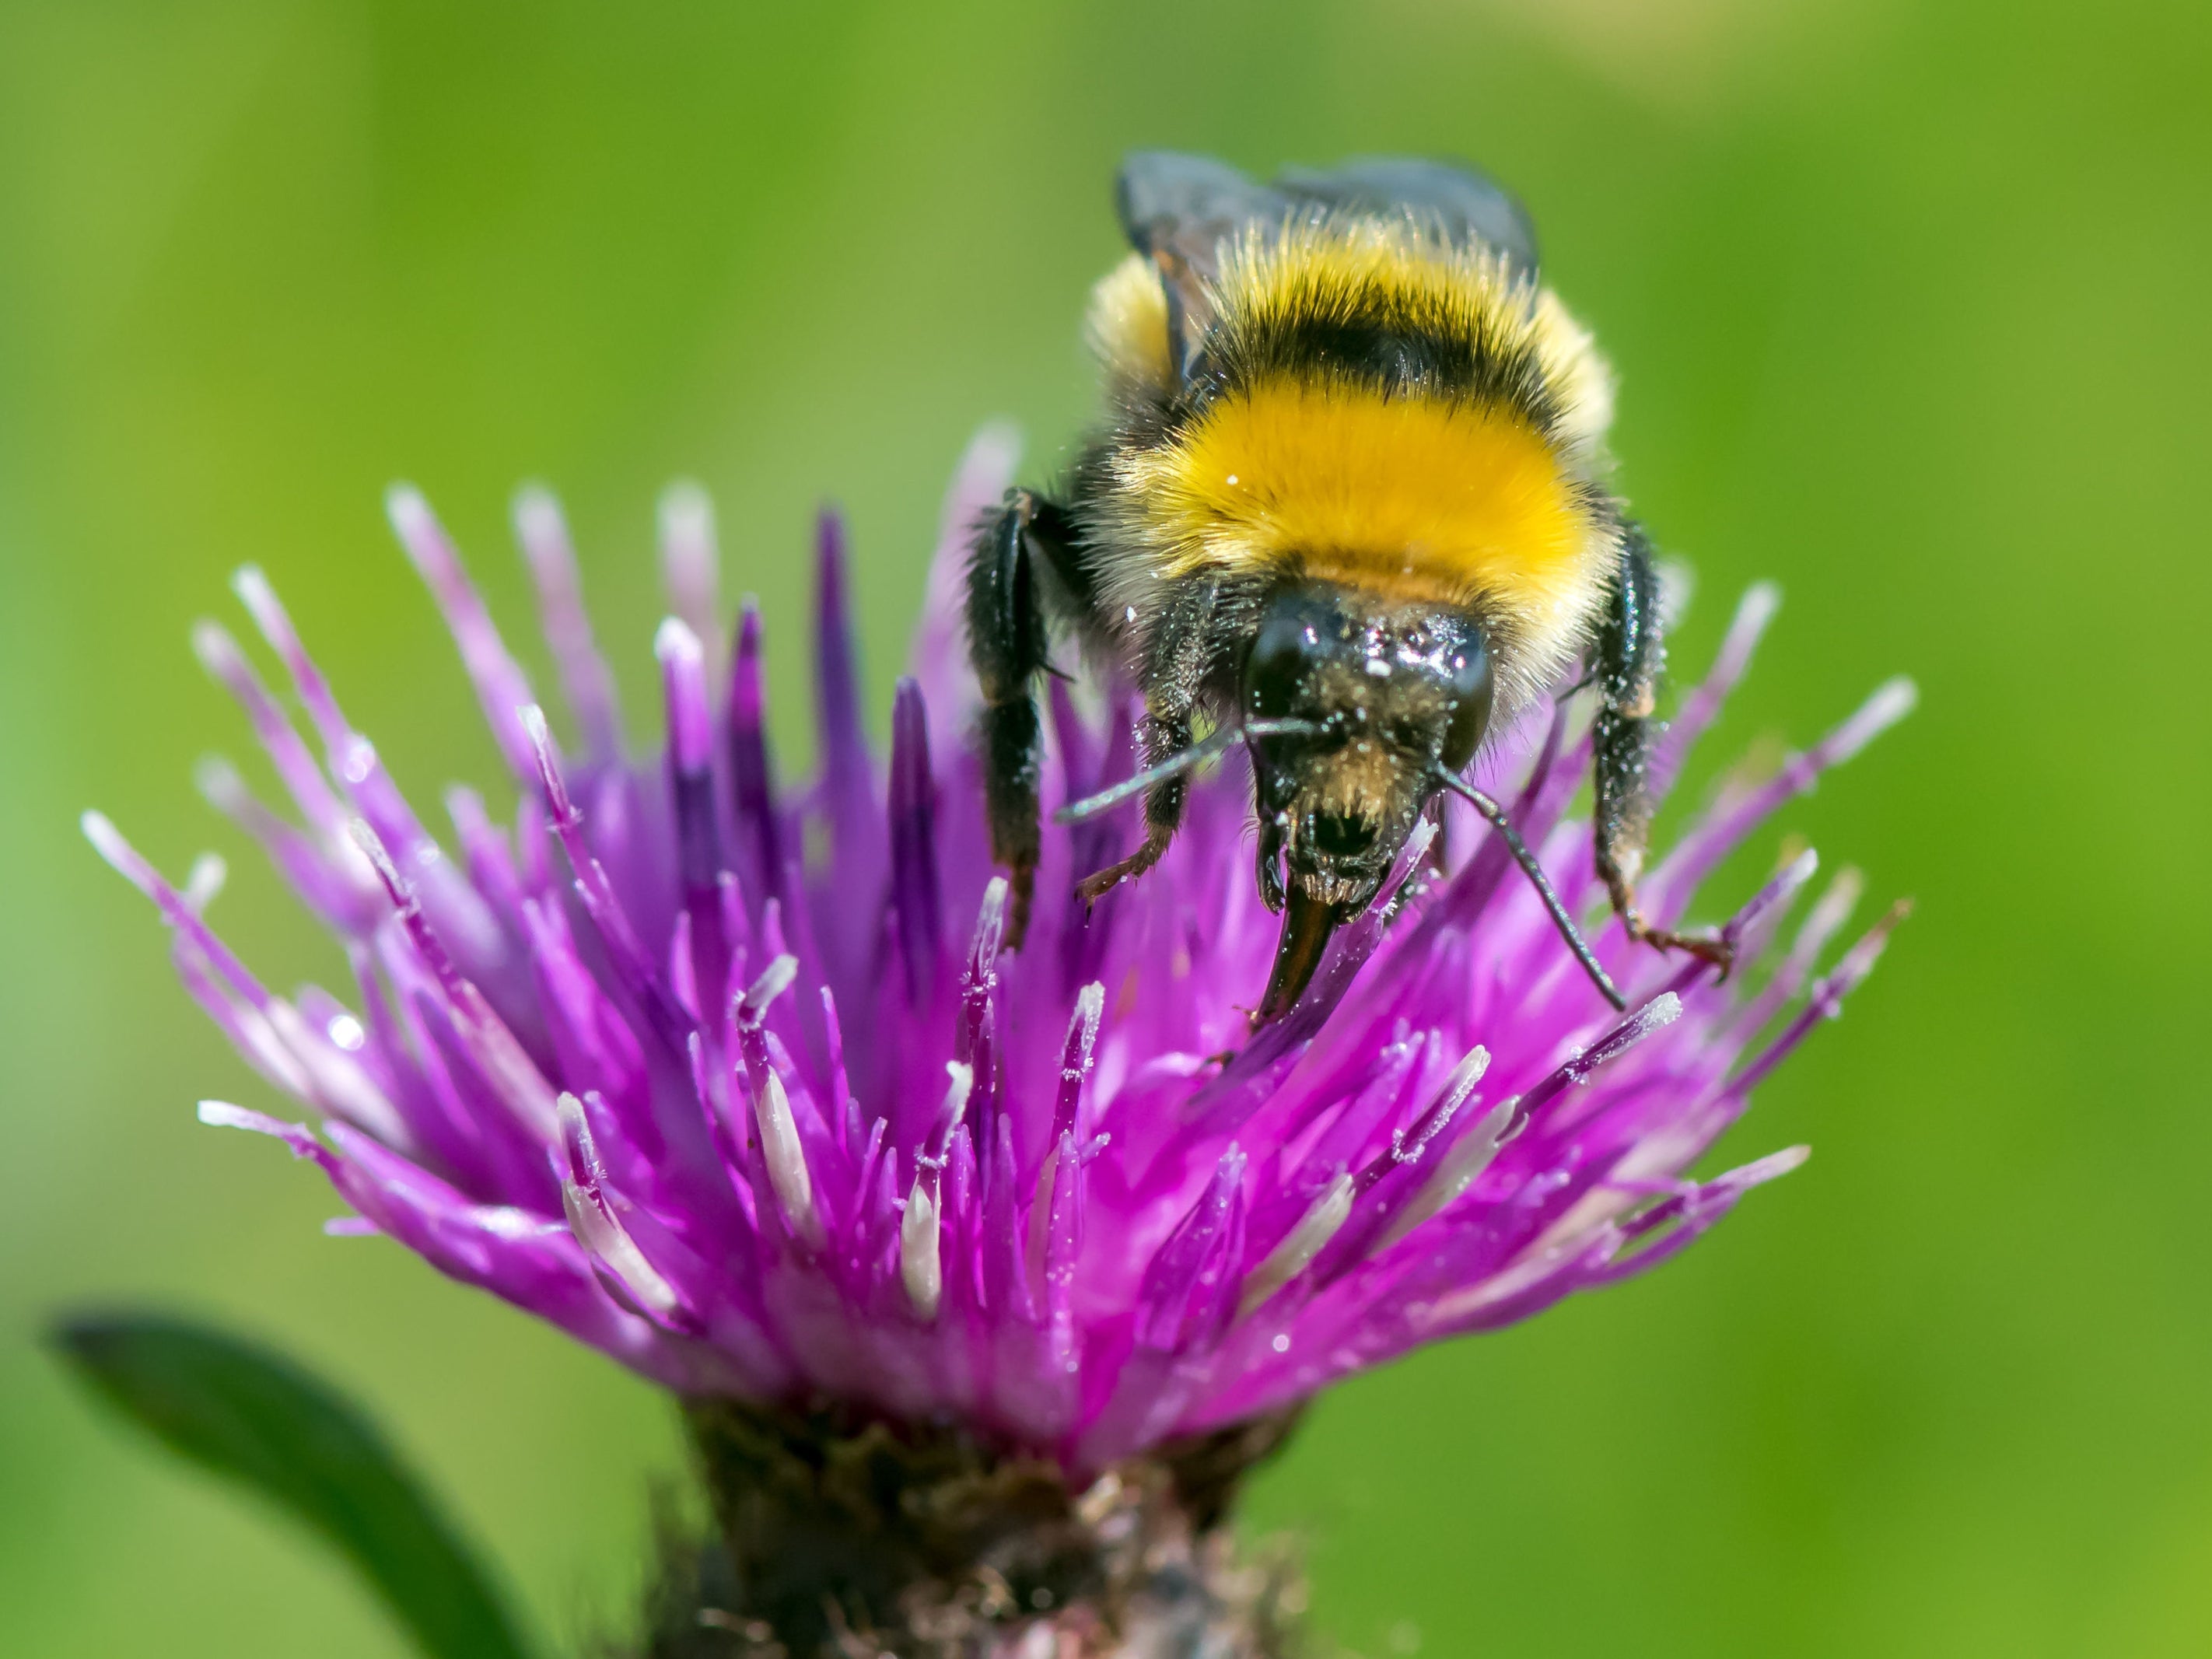 Conservationists discovered one of the UK’s rarest bumblebees, the Great Yellow bumblebee, in Caithness, Scotland